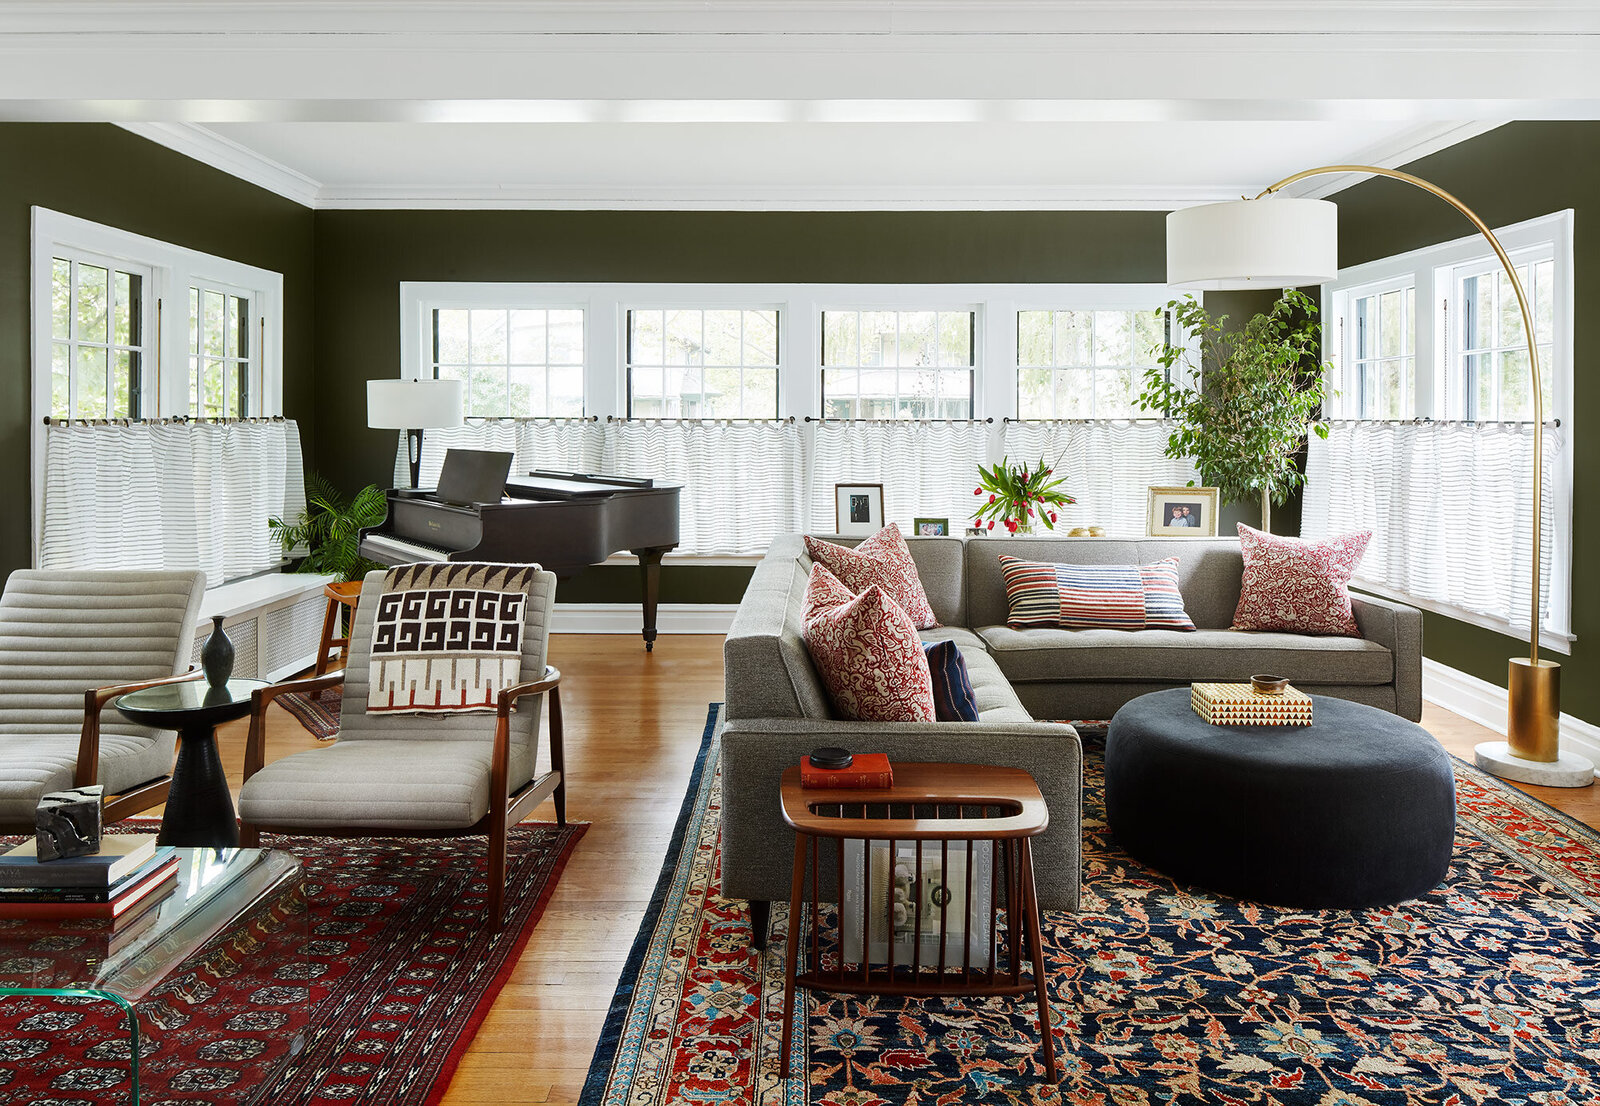 Midcentury living room design with olive green and grey decor and colorful patterned rugs